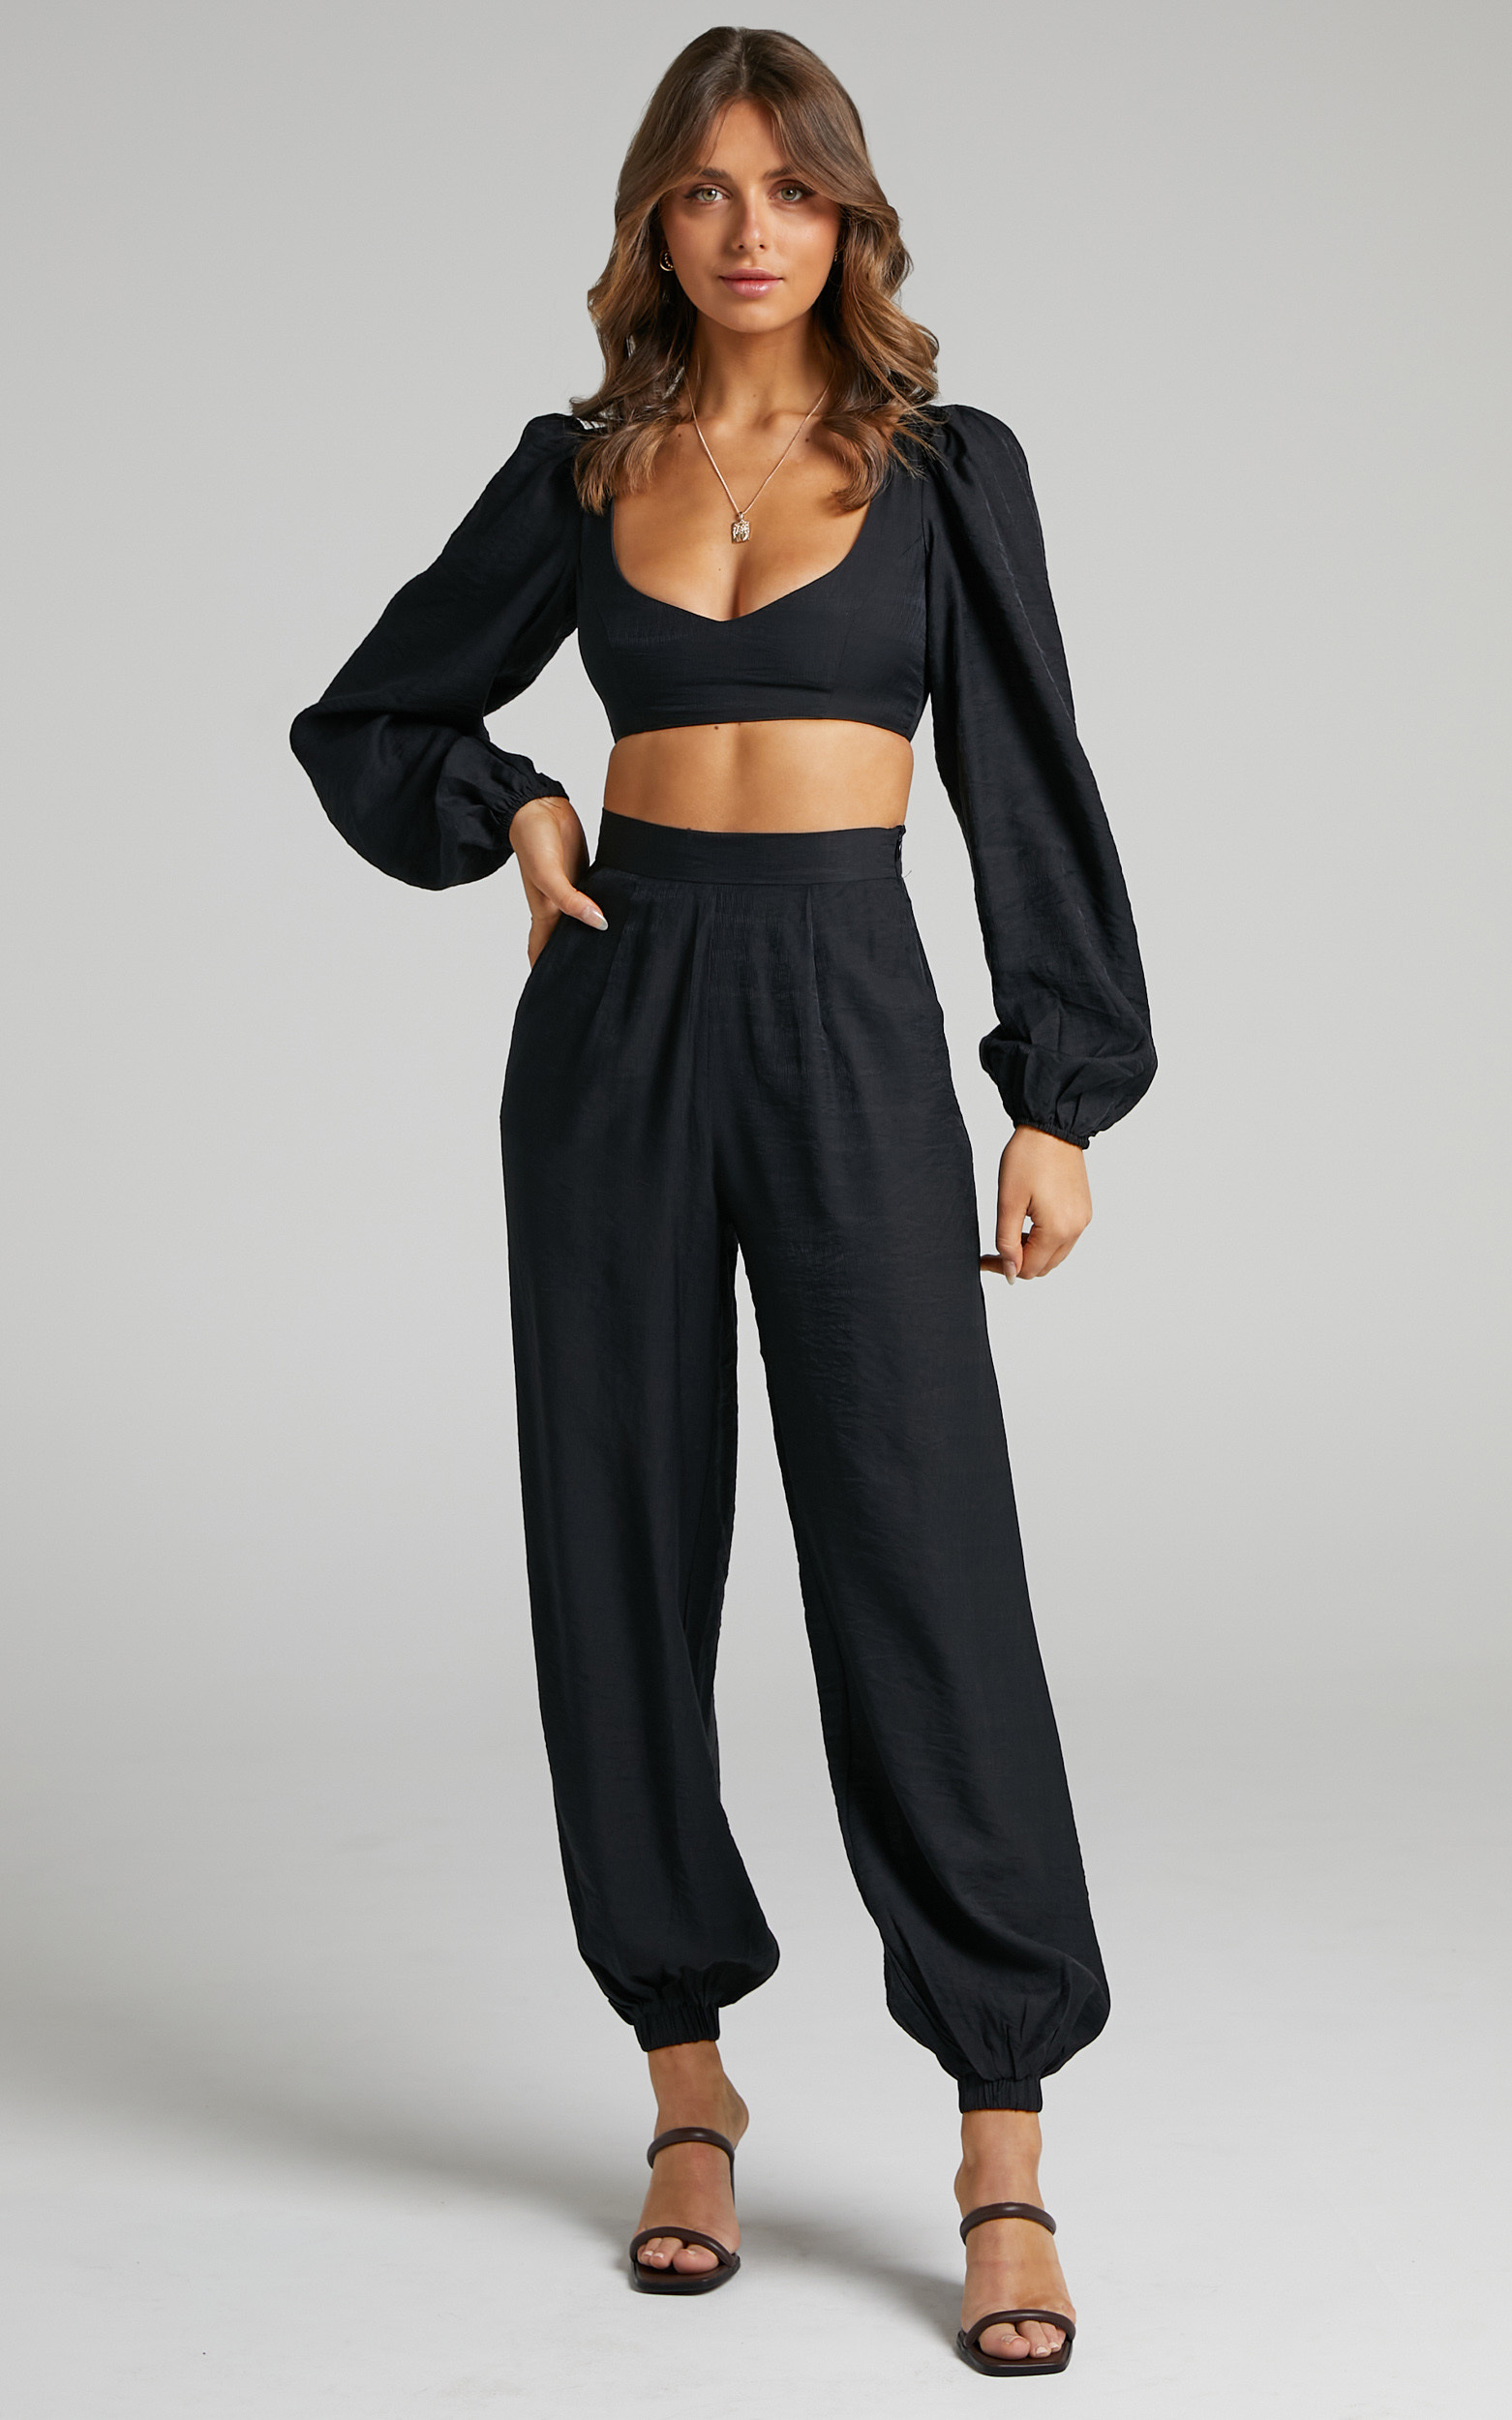 Renalyne  Genie Pants Two Piece Set with Balloon Sleeve in Black - 04, BLK1, hi-res image number null